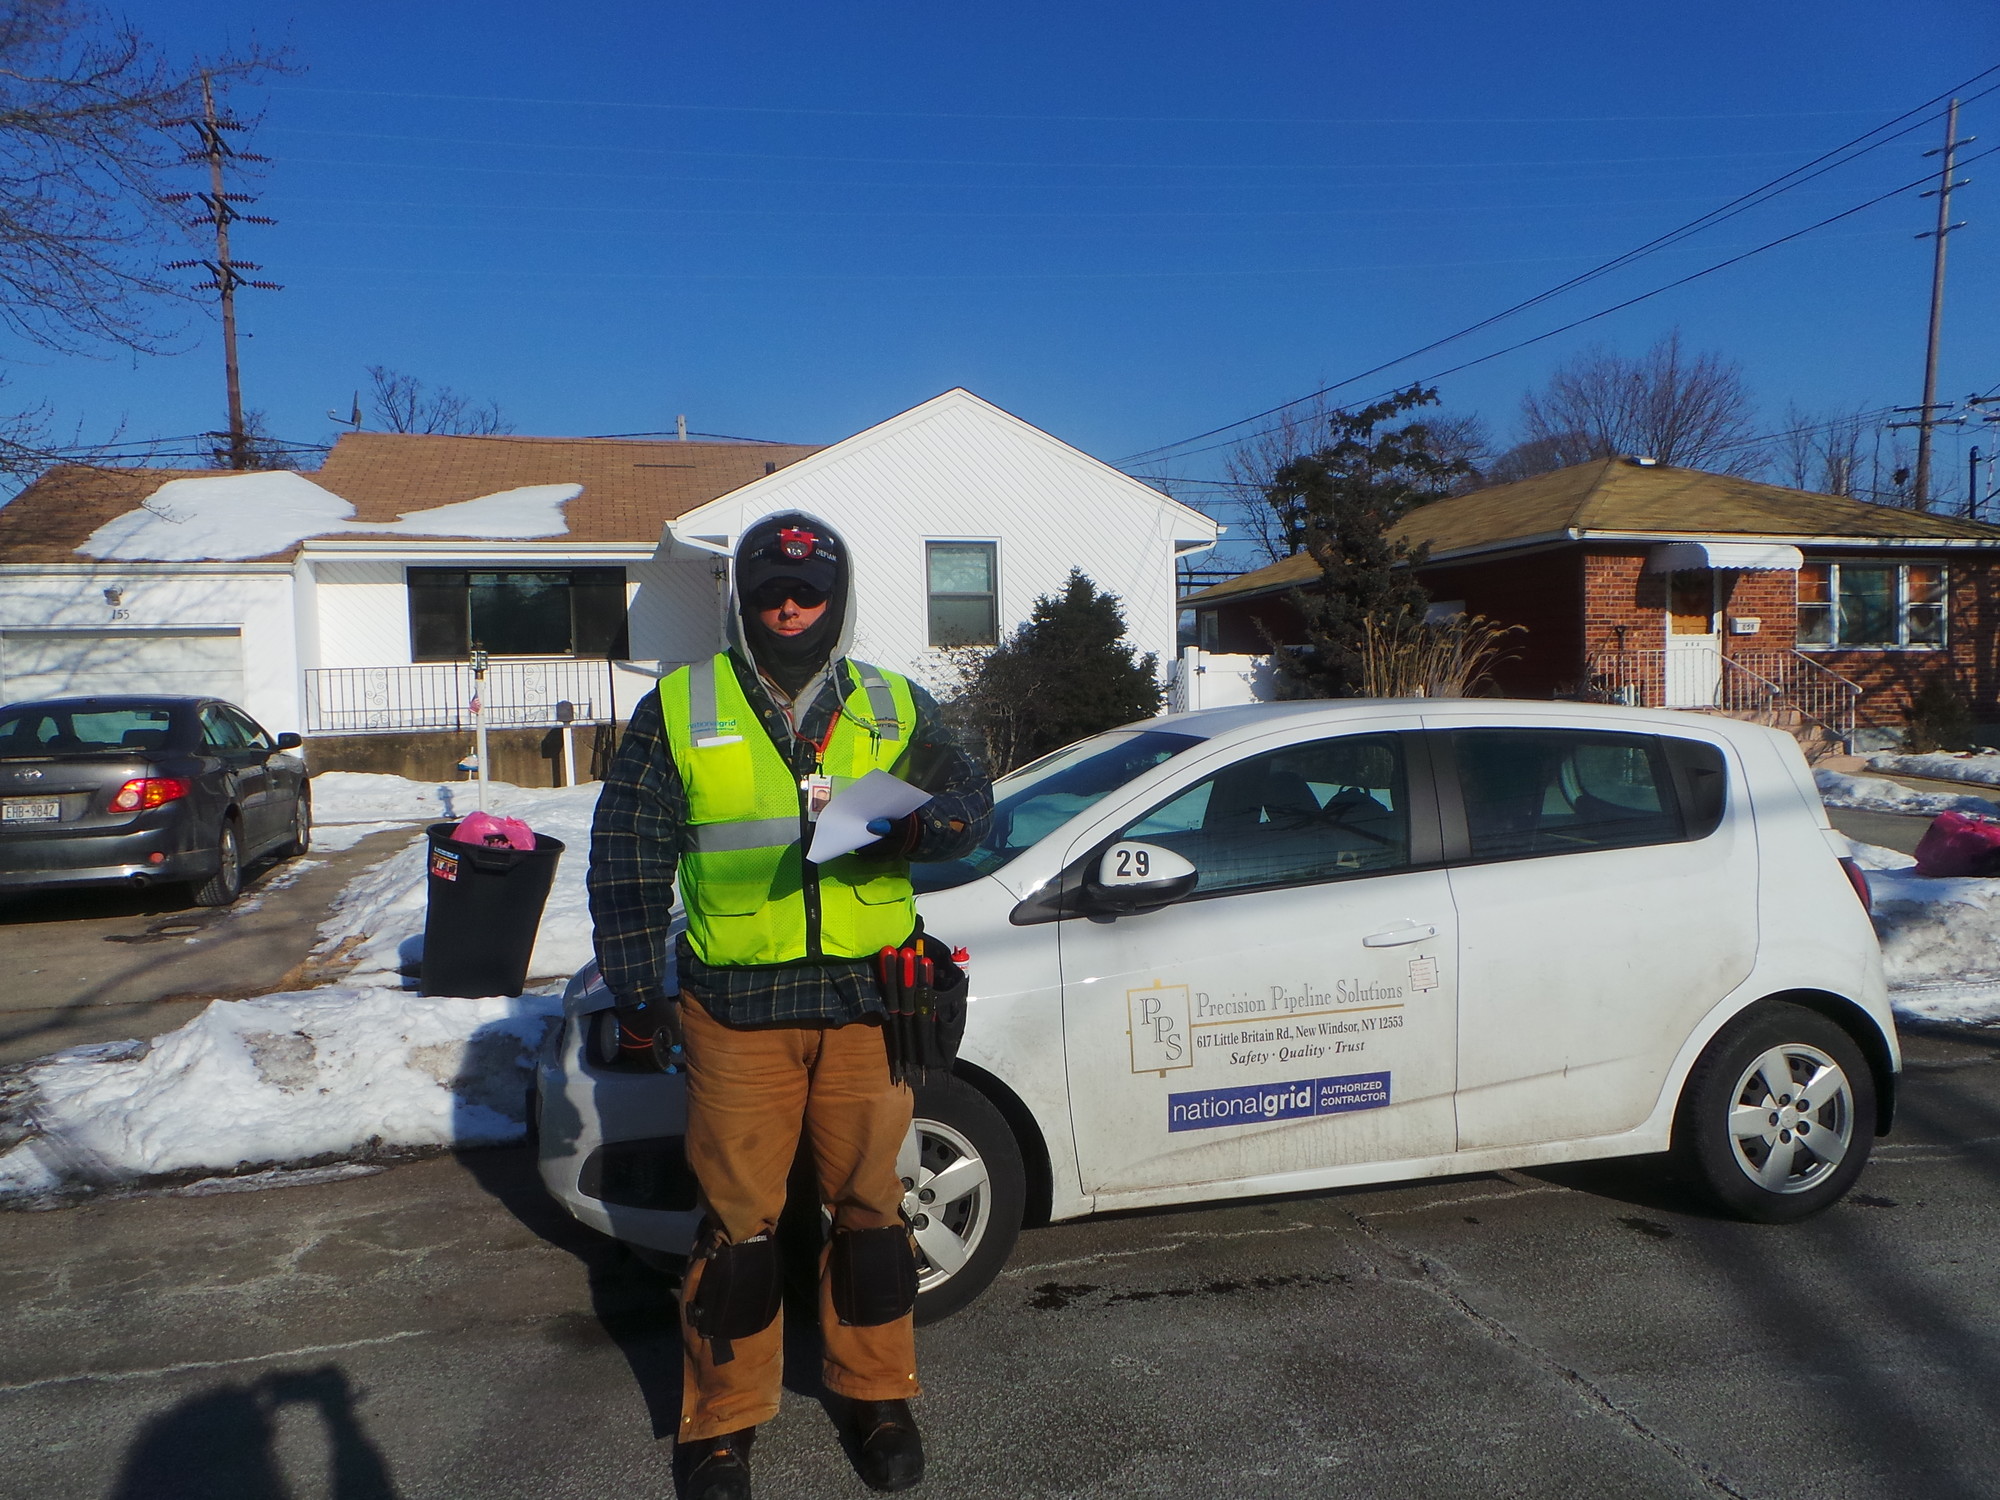 John Carter from National Grid was found bundled up and ready to read meters on Church Avenue in Malverne.